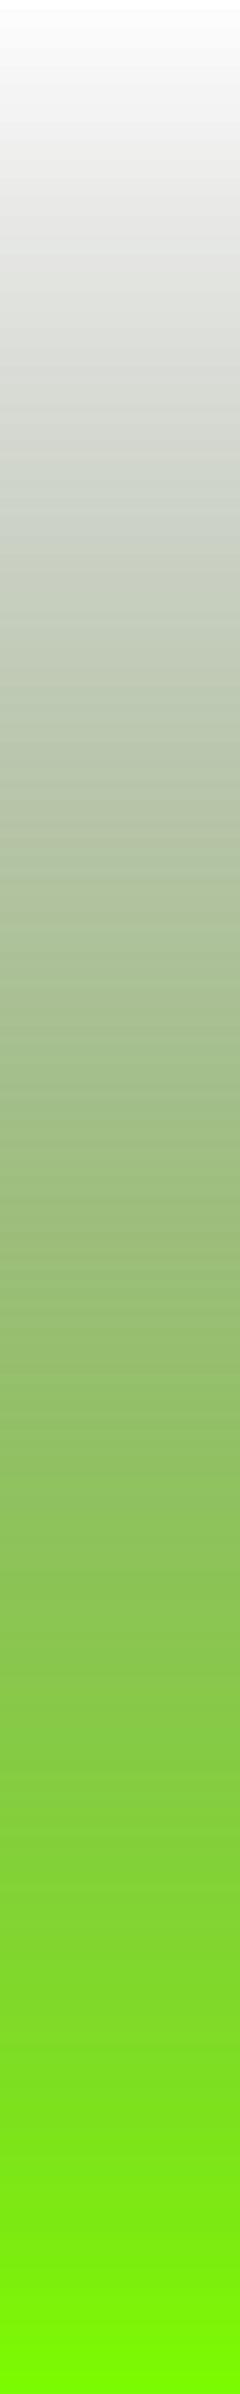 ws-gradient-lawngreen png